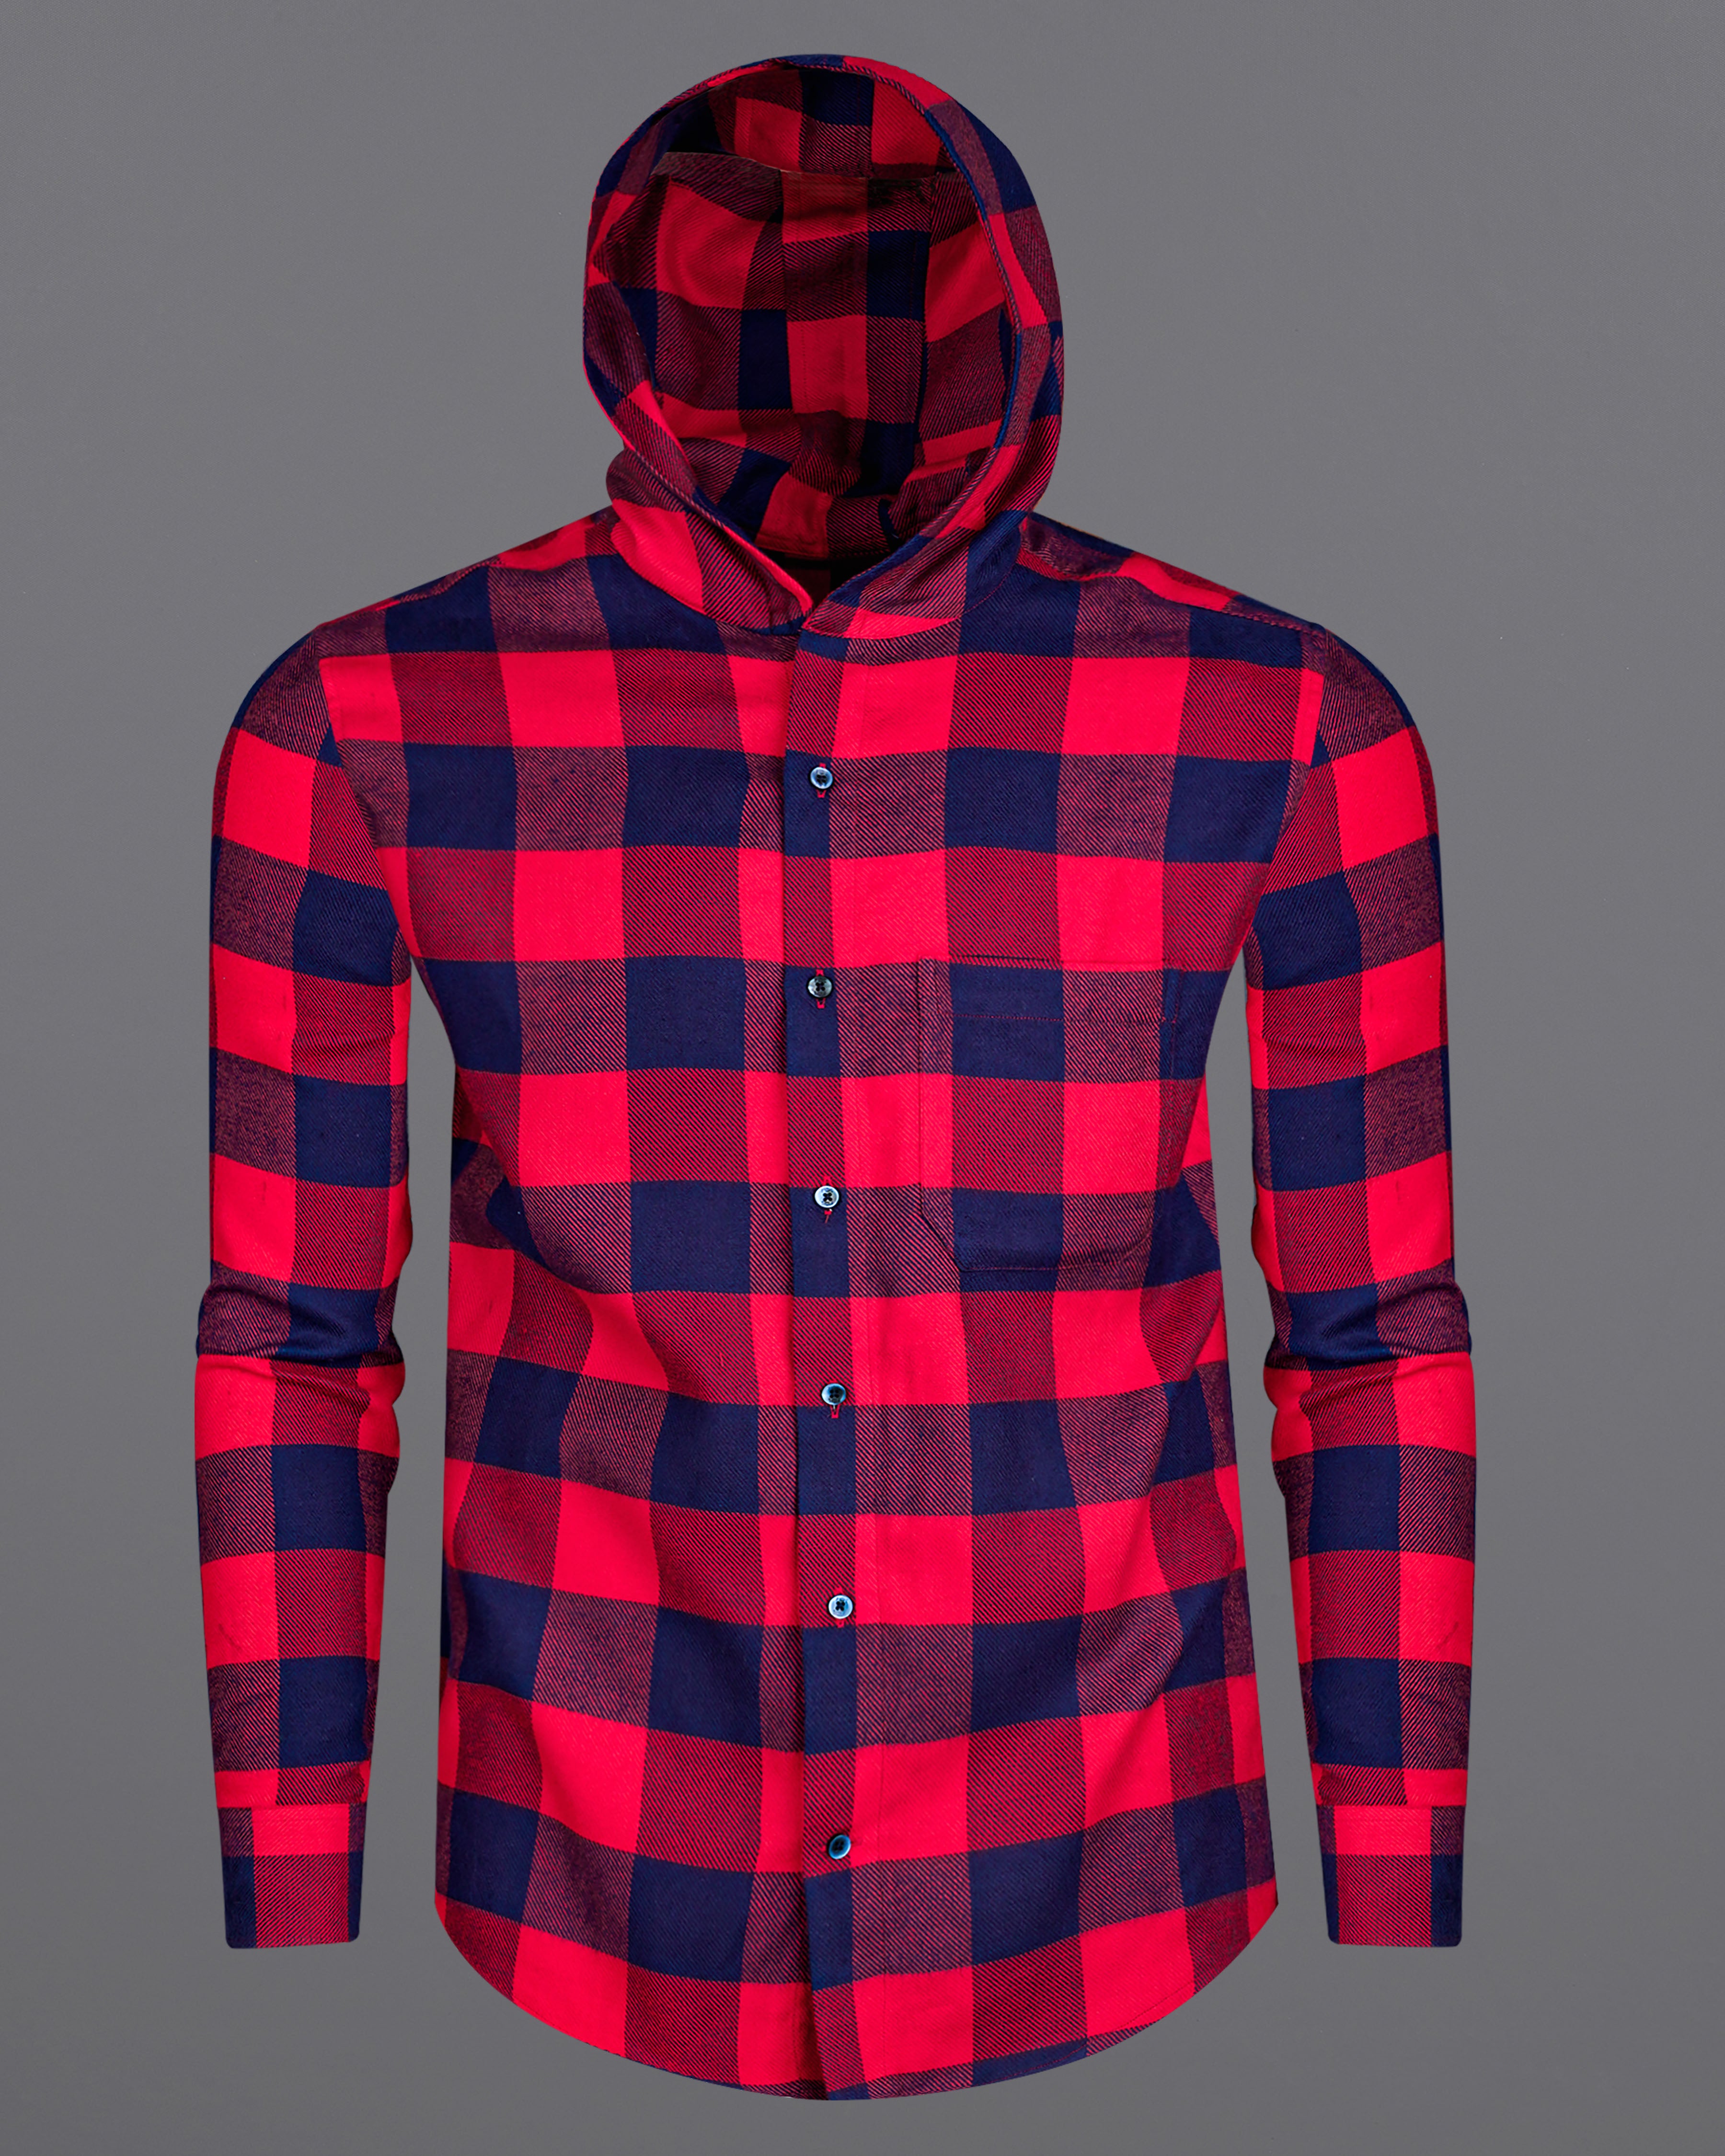 Monza Red with Mirage Blue Checked Hoodie Flannel Shirt 8187-CHD-BLE-38, 8187-CHD-BLE-H-38, 8187-CHD-BLE-39, 8187-CHD-BLE-H-39, 8187-CHD-BLE-40, 8187-CHD-BLE-H-40, 8187-CHD-BLE-42, 8187-CHD-BLE-H-42, 8187-CHD-BLE-44, 8187-CHD-BLE-H-44, 8187-CHD-BLE-46, 8187-CHD-BLE-H-46, 8187-CHD-BLE-48, 8187-CHD-BLE-H-48, 8187-CHD-BLE-50, 8187-CHD-BLE-H-50, 8187-CHD-BLE-52, 8187-CHD-BLE-H-52